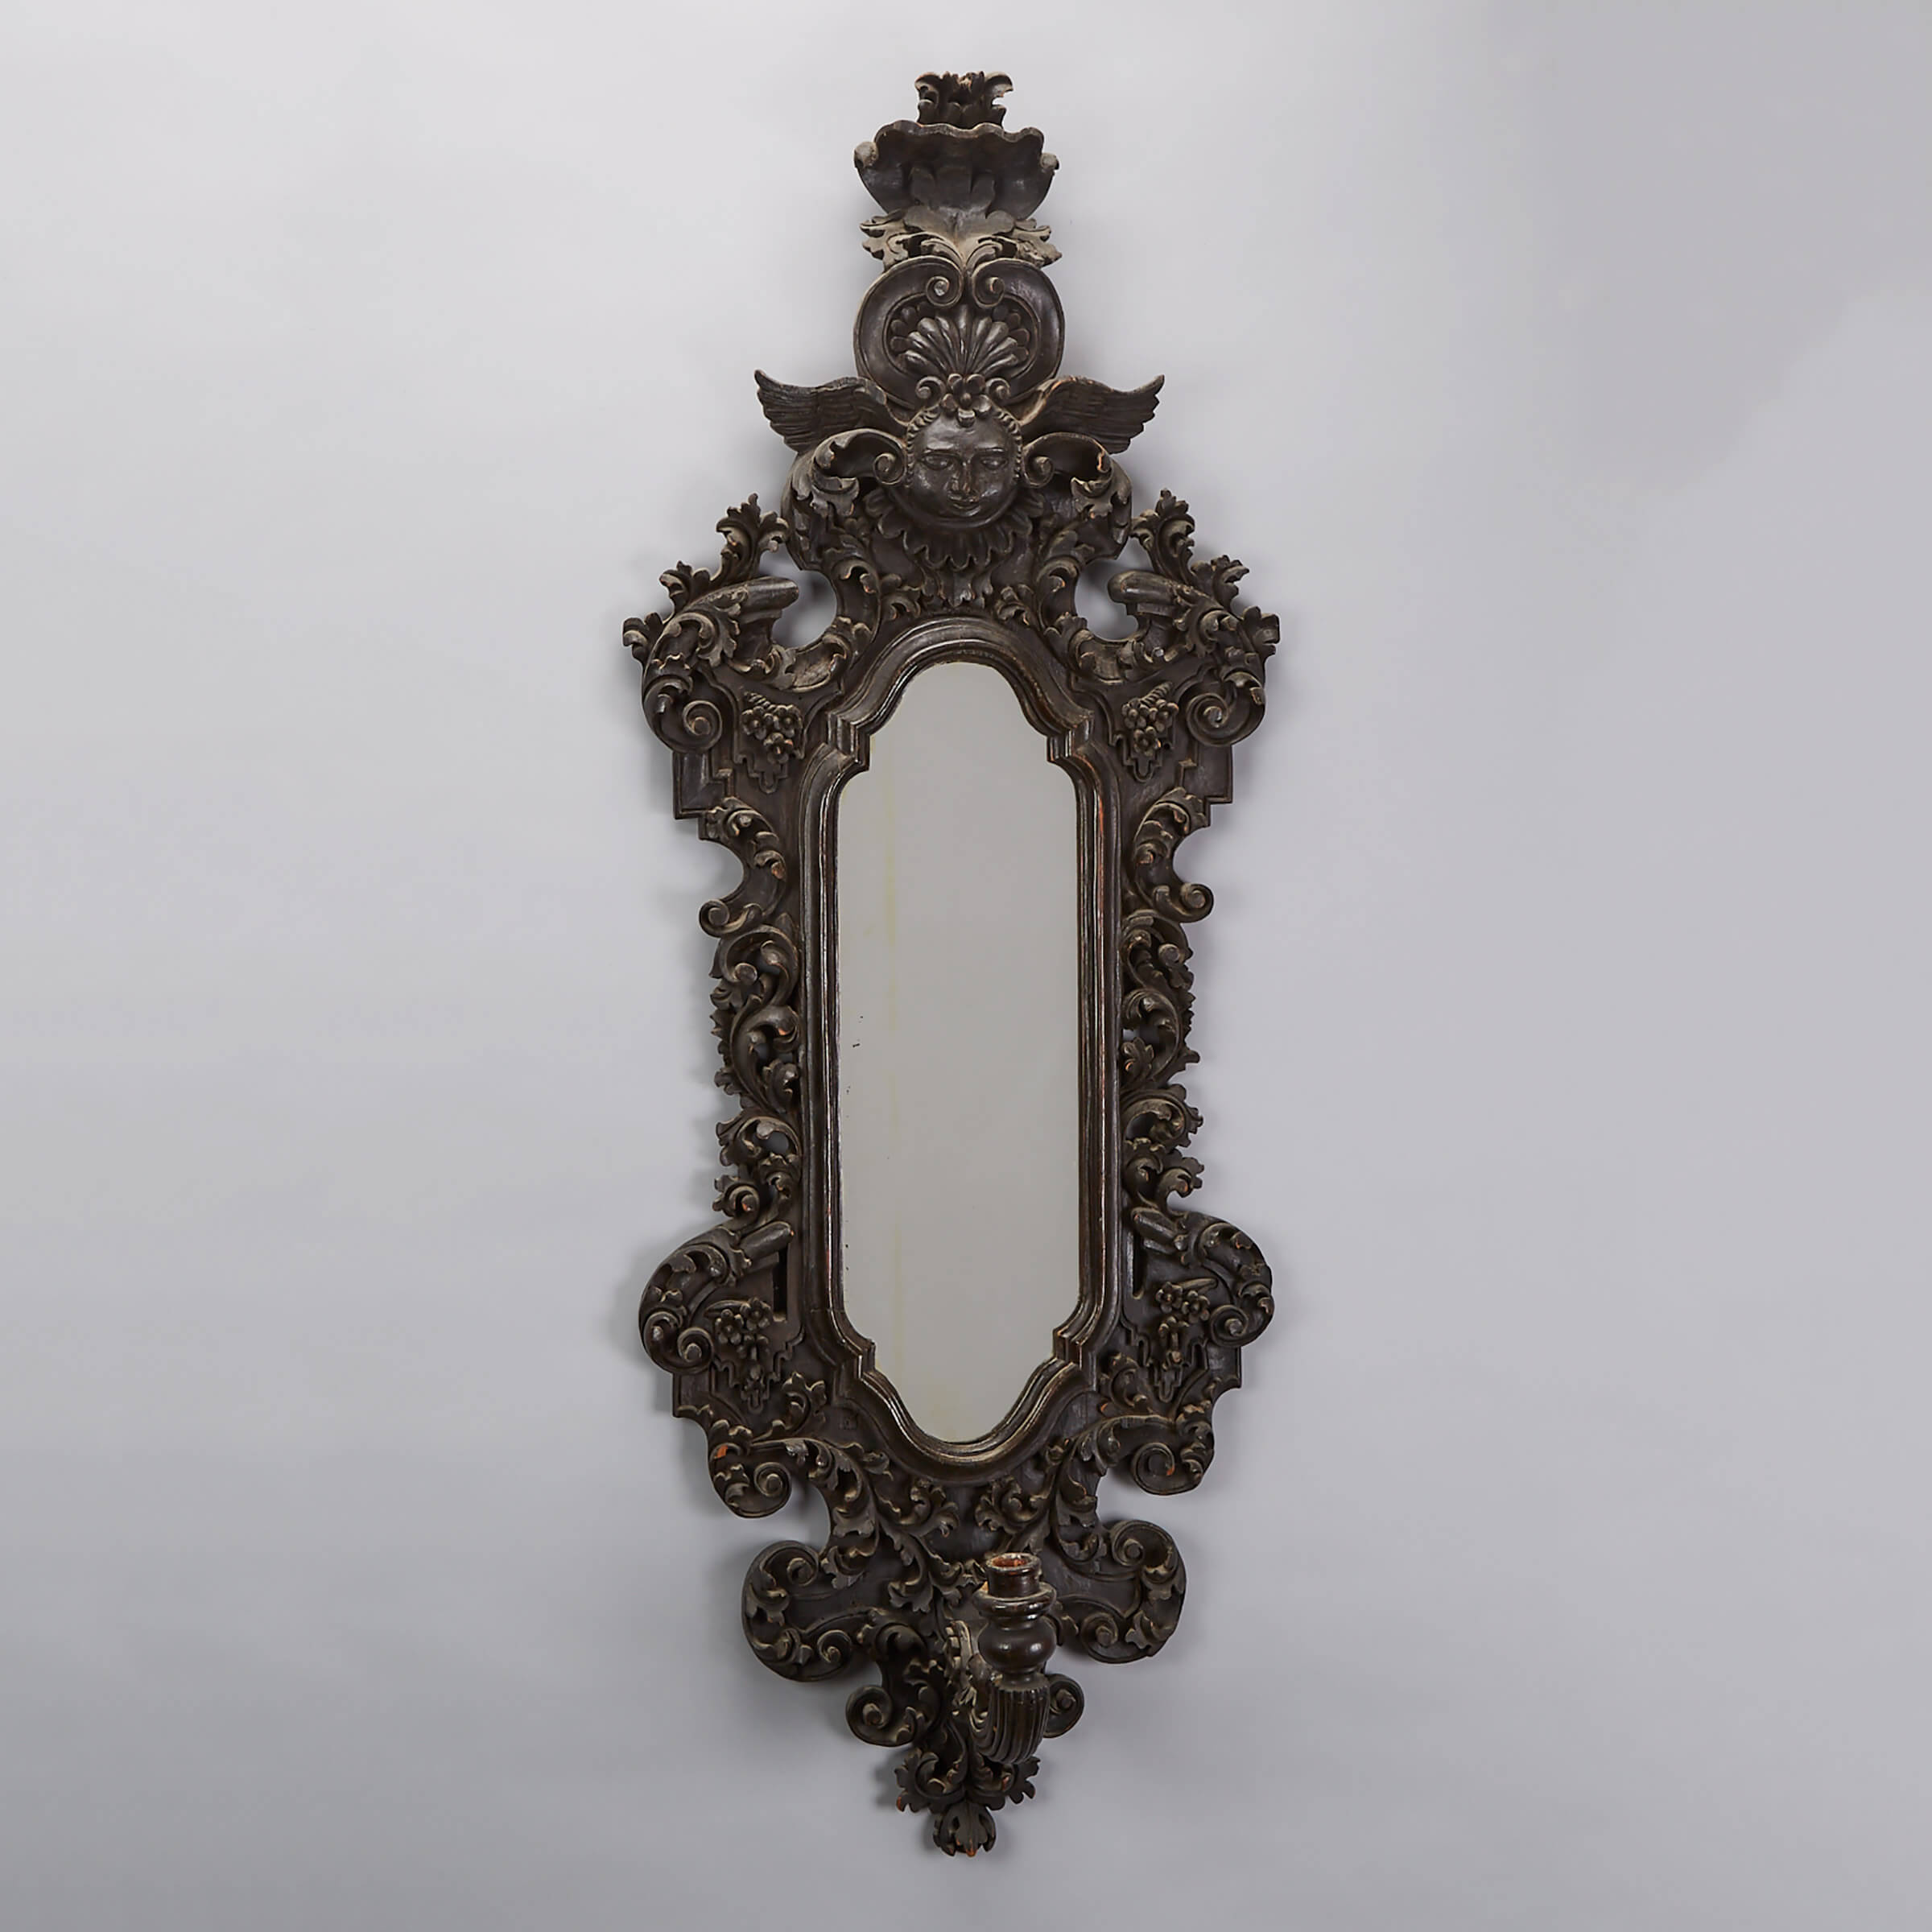 Victorian Renaissance Revival Mirrored Wall Sconce, late 19th century 